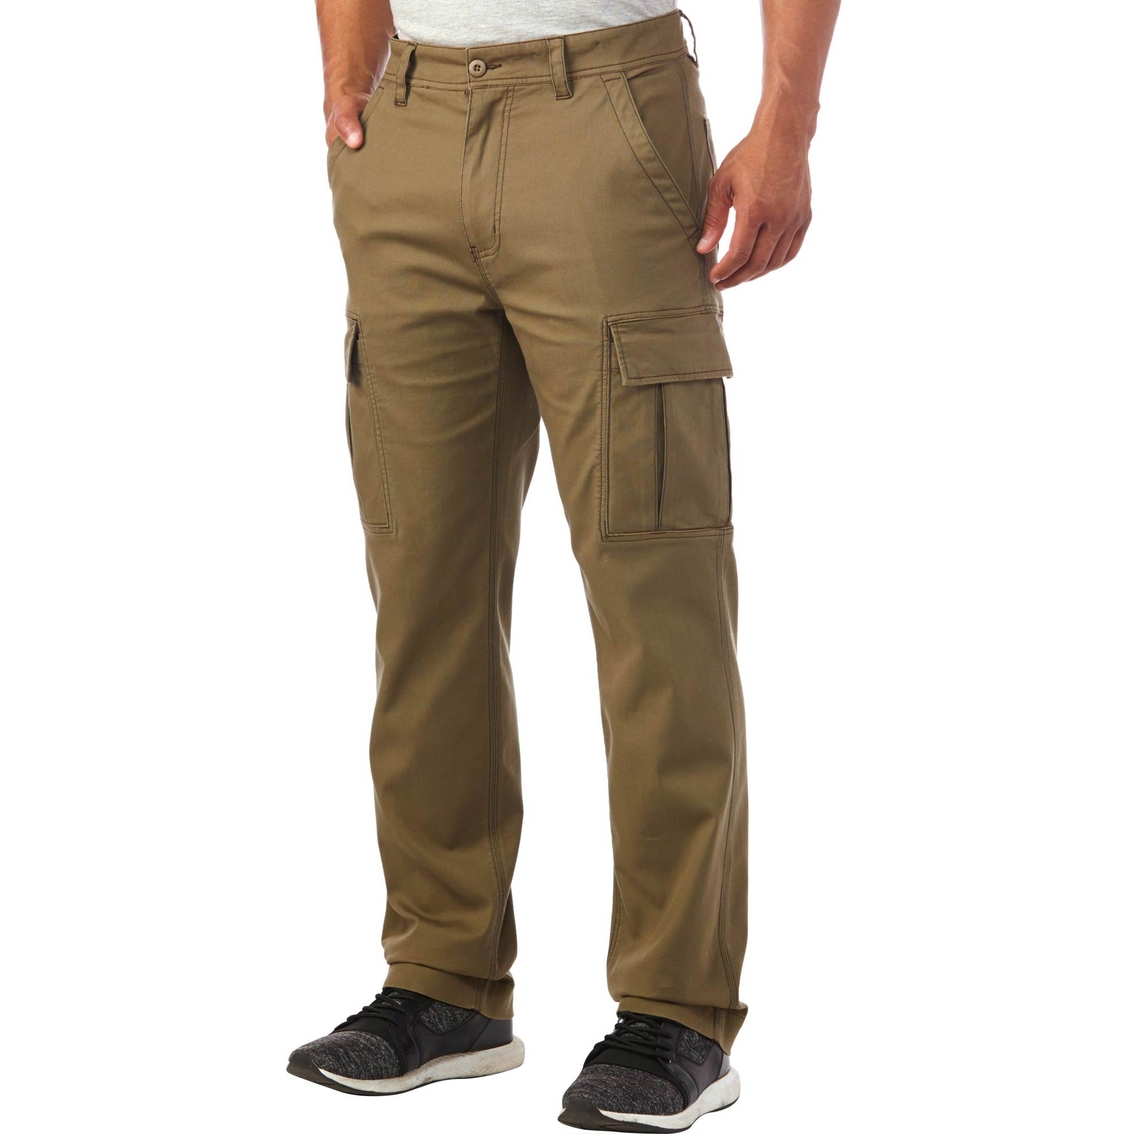 Wearfirst Stretch Pin Faille Cargo Pants | Pants | Clothing ...